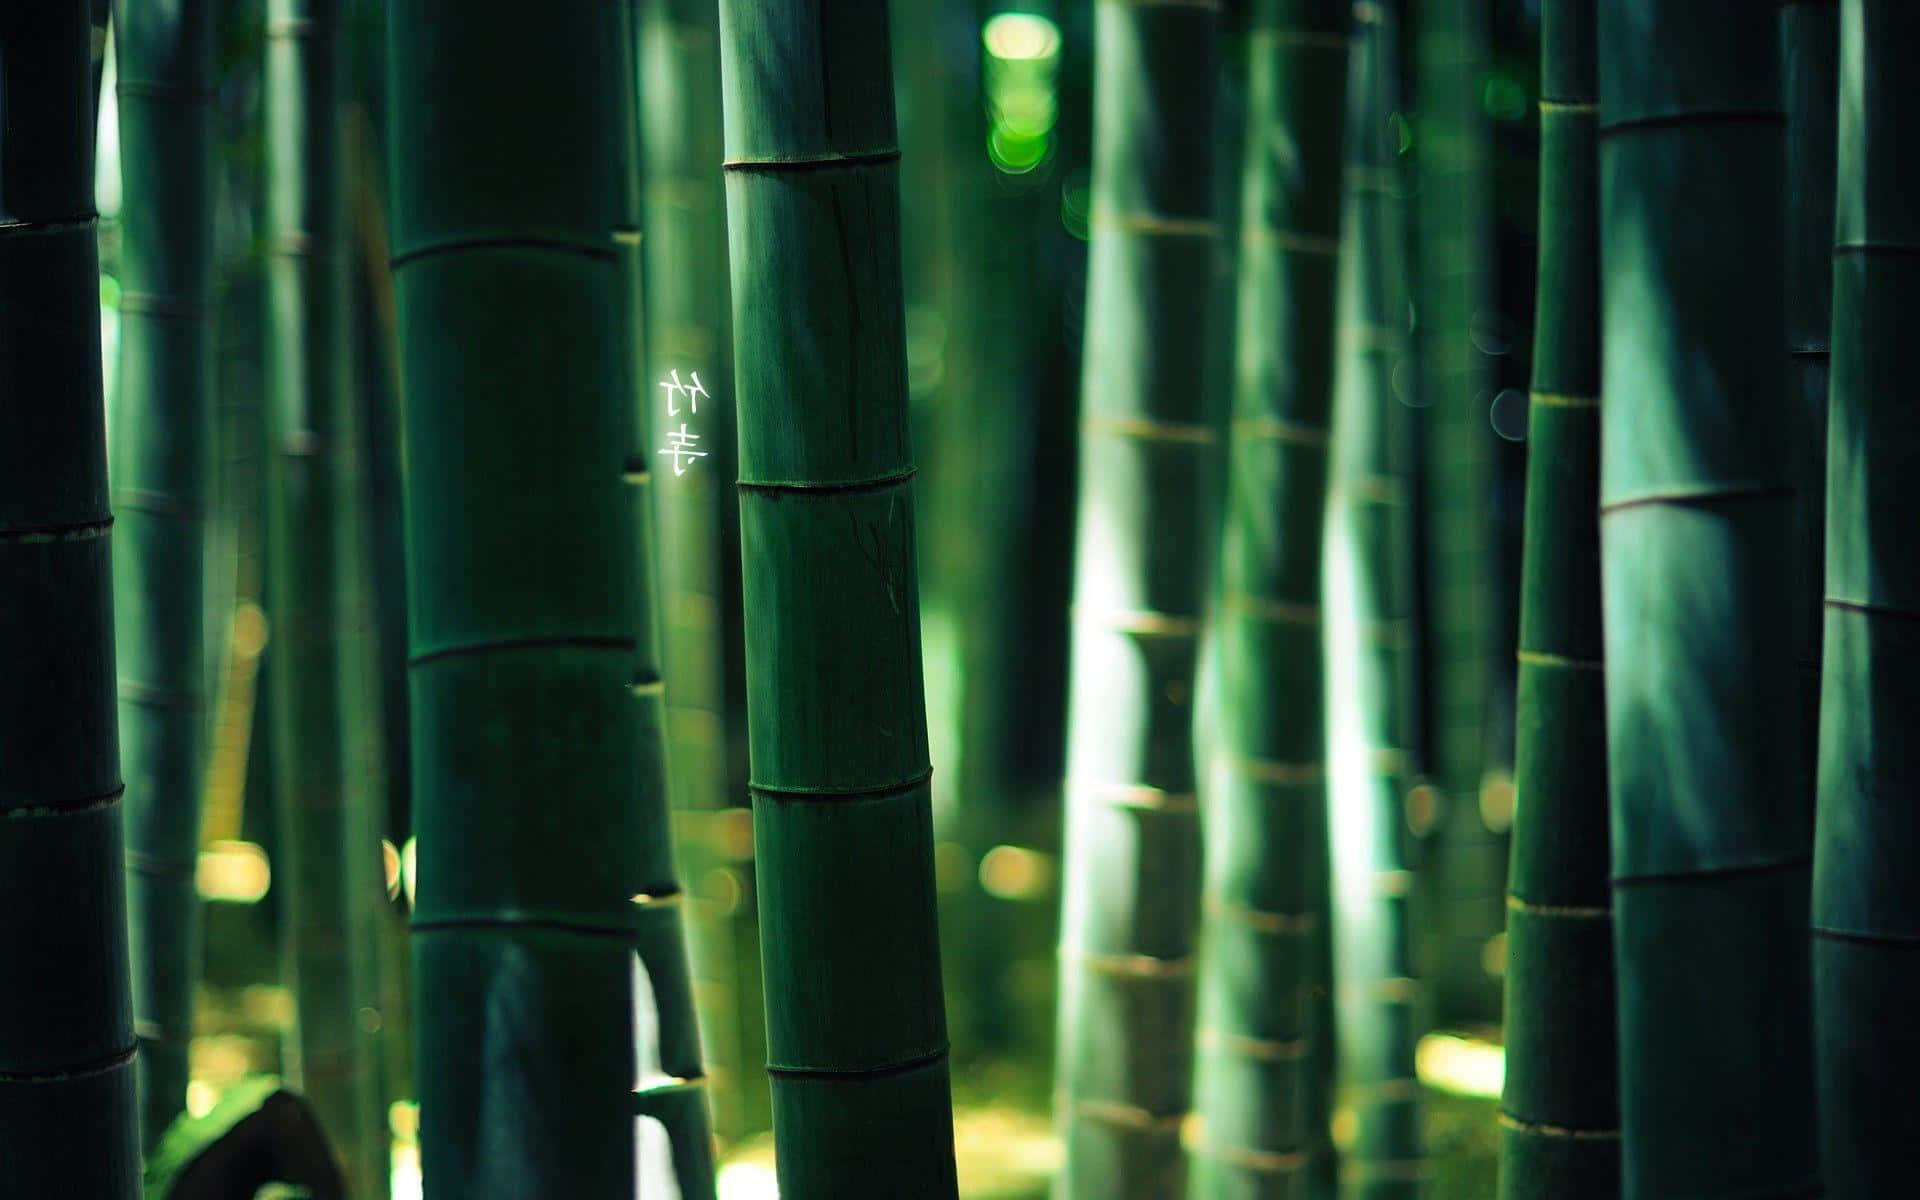 A peaceful view of a desktop filled with bamboo. Wallpaper